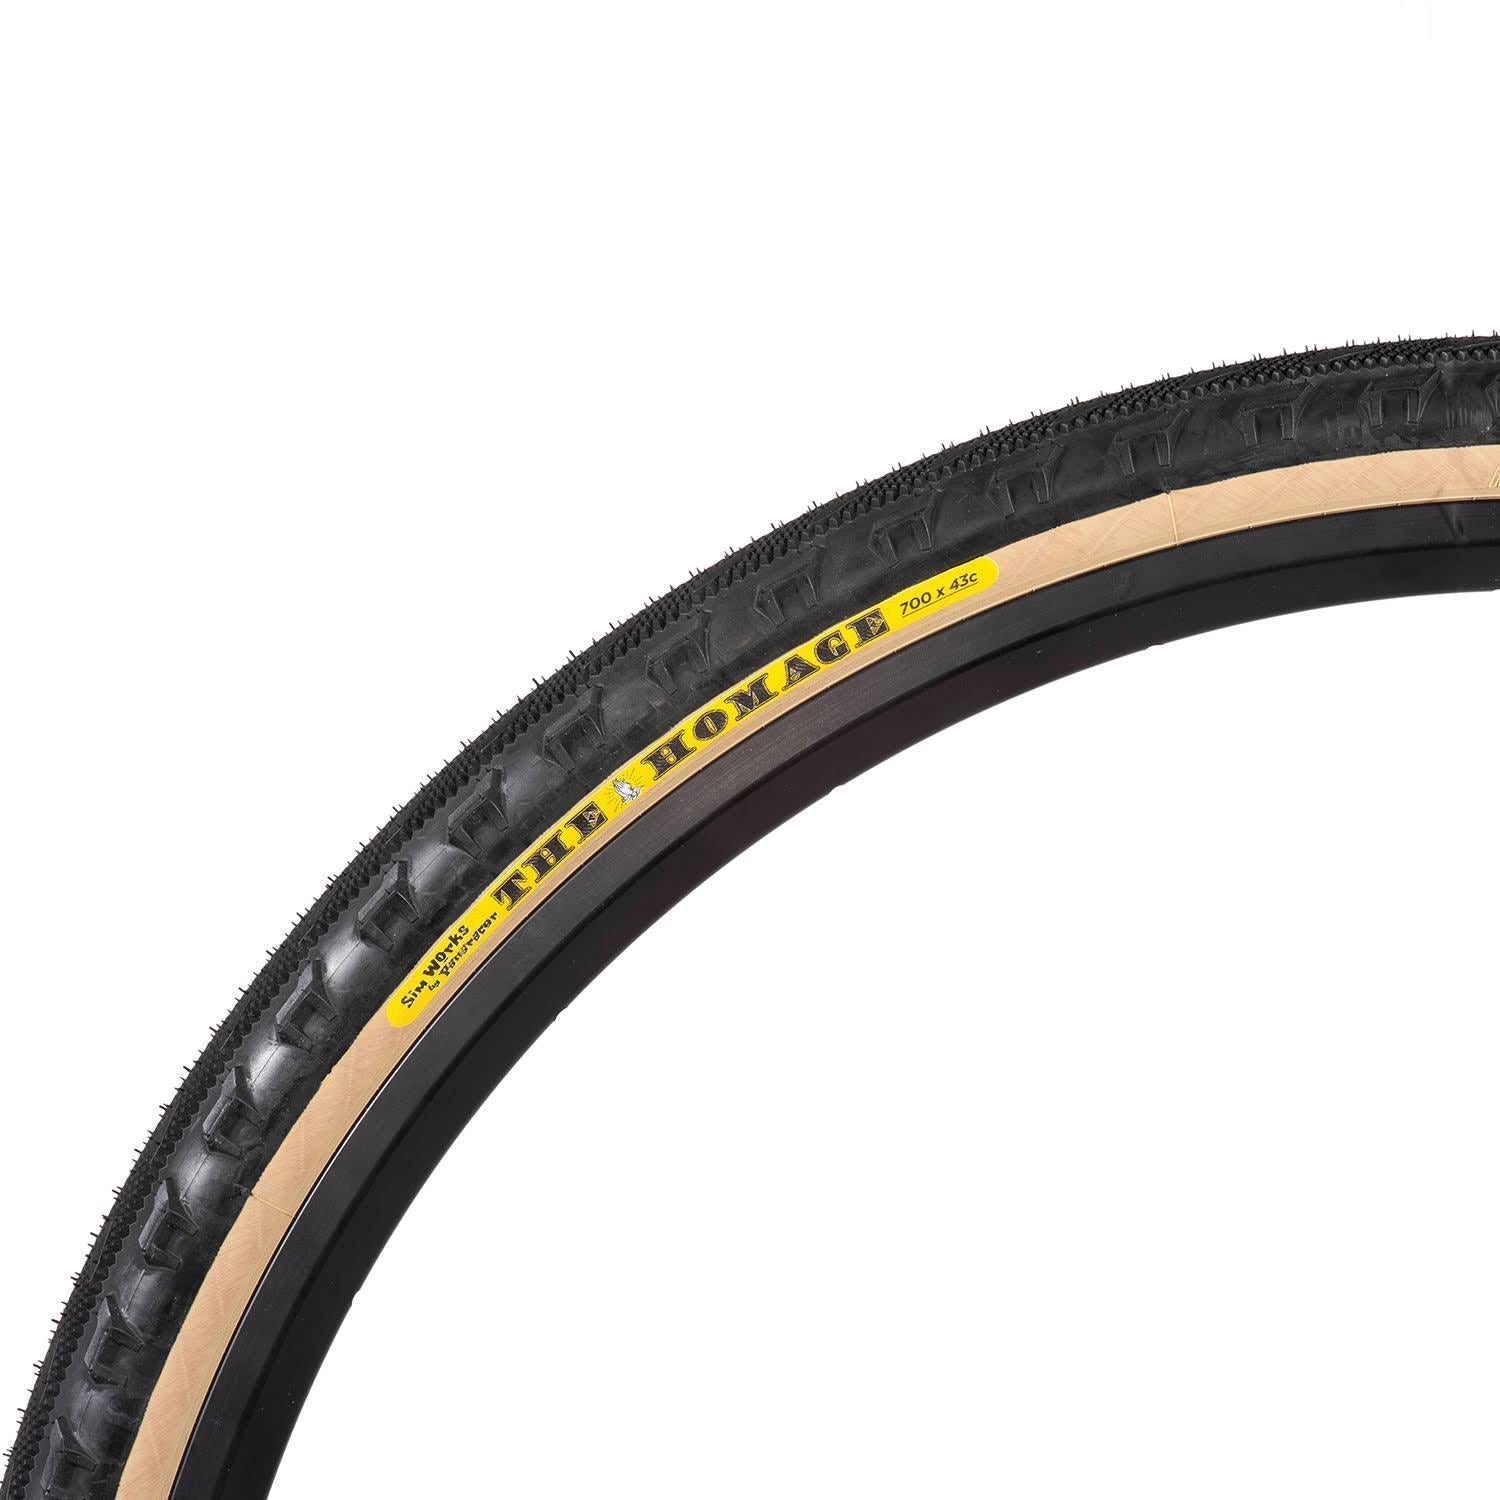 SIMWORKS The Homage Tire 700c